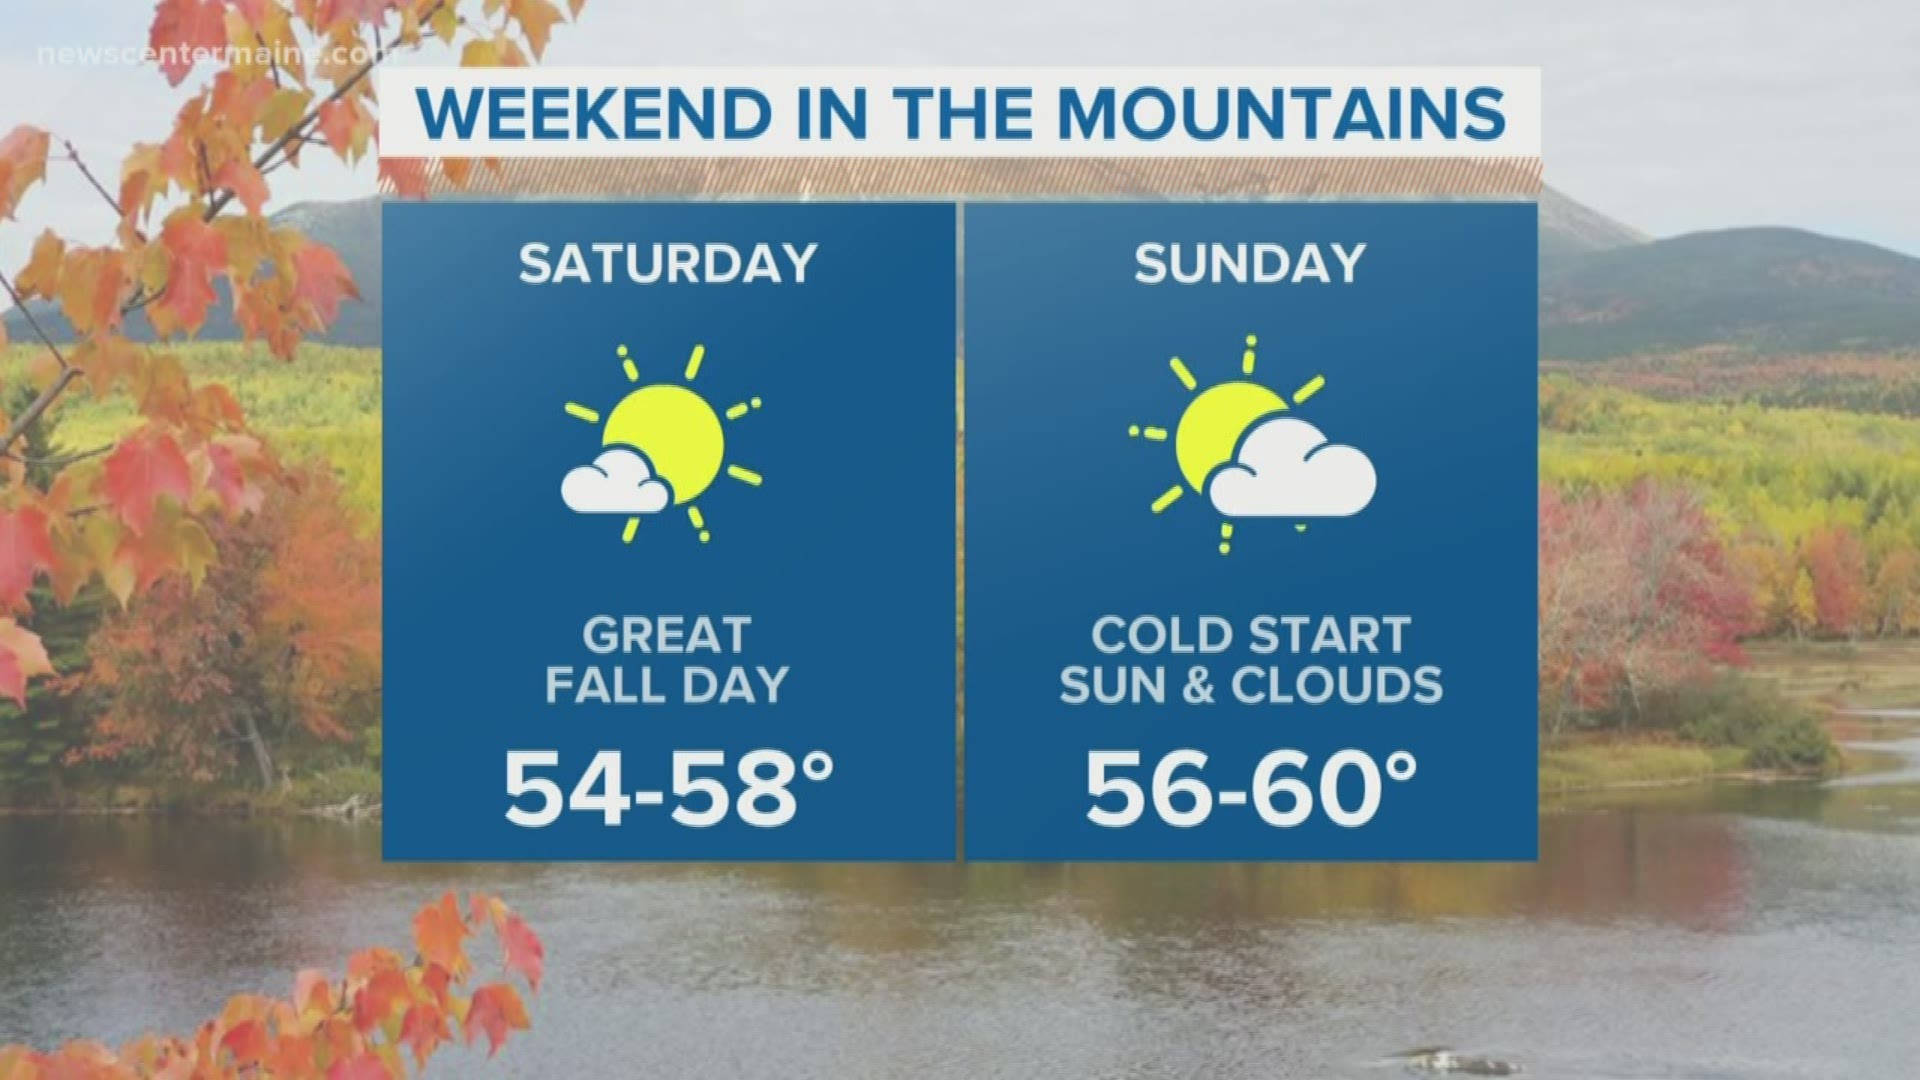 Fall foliage forecast for the weekend